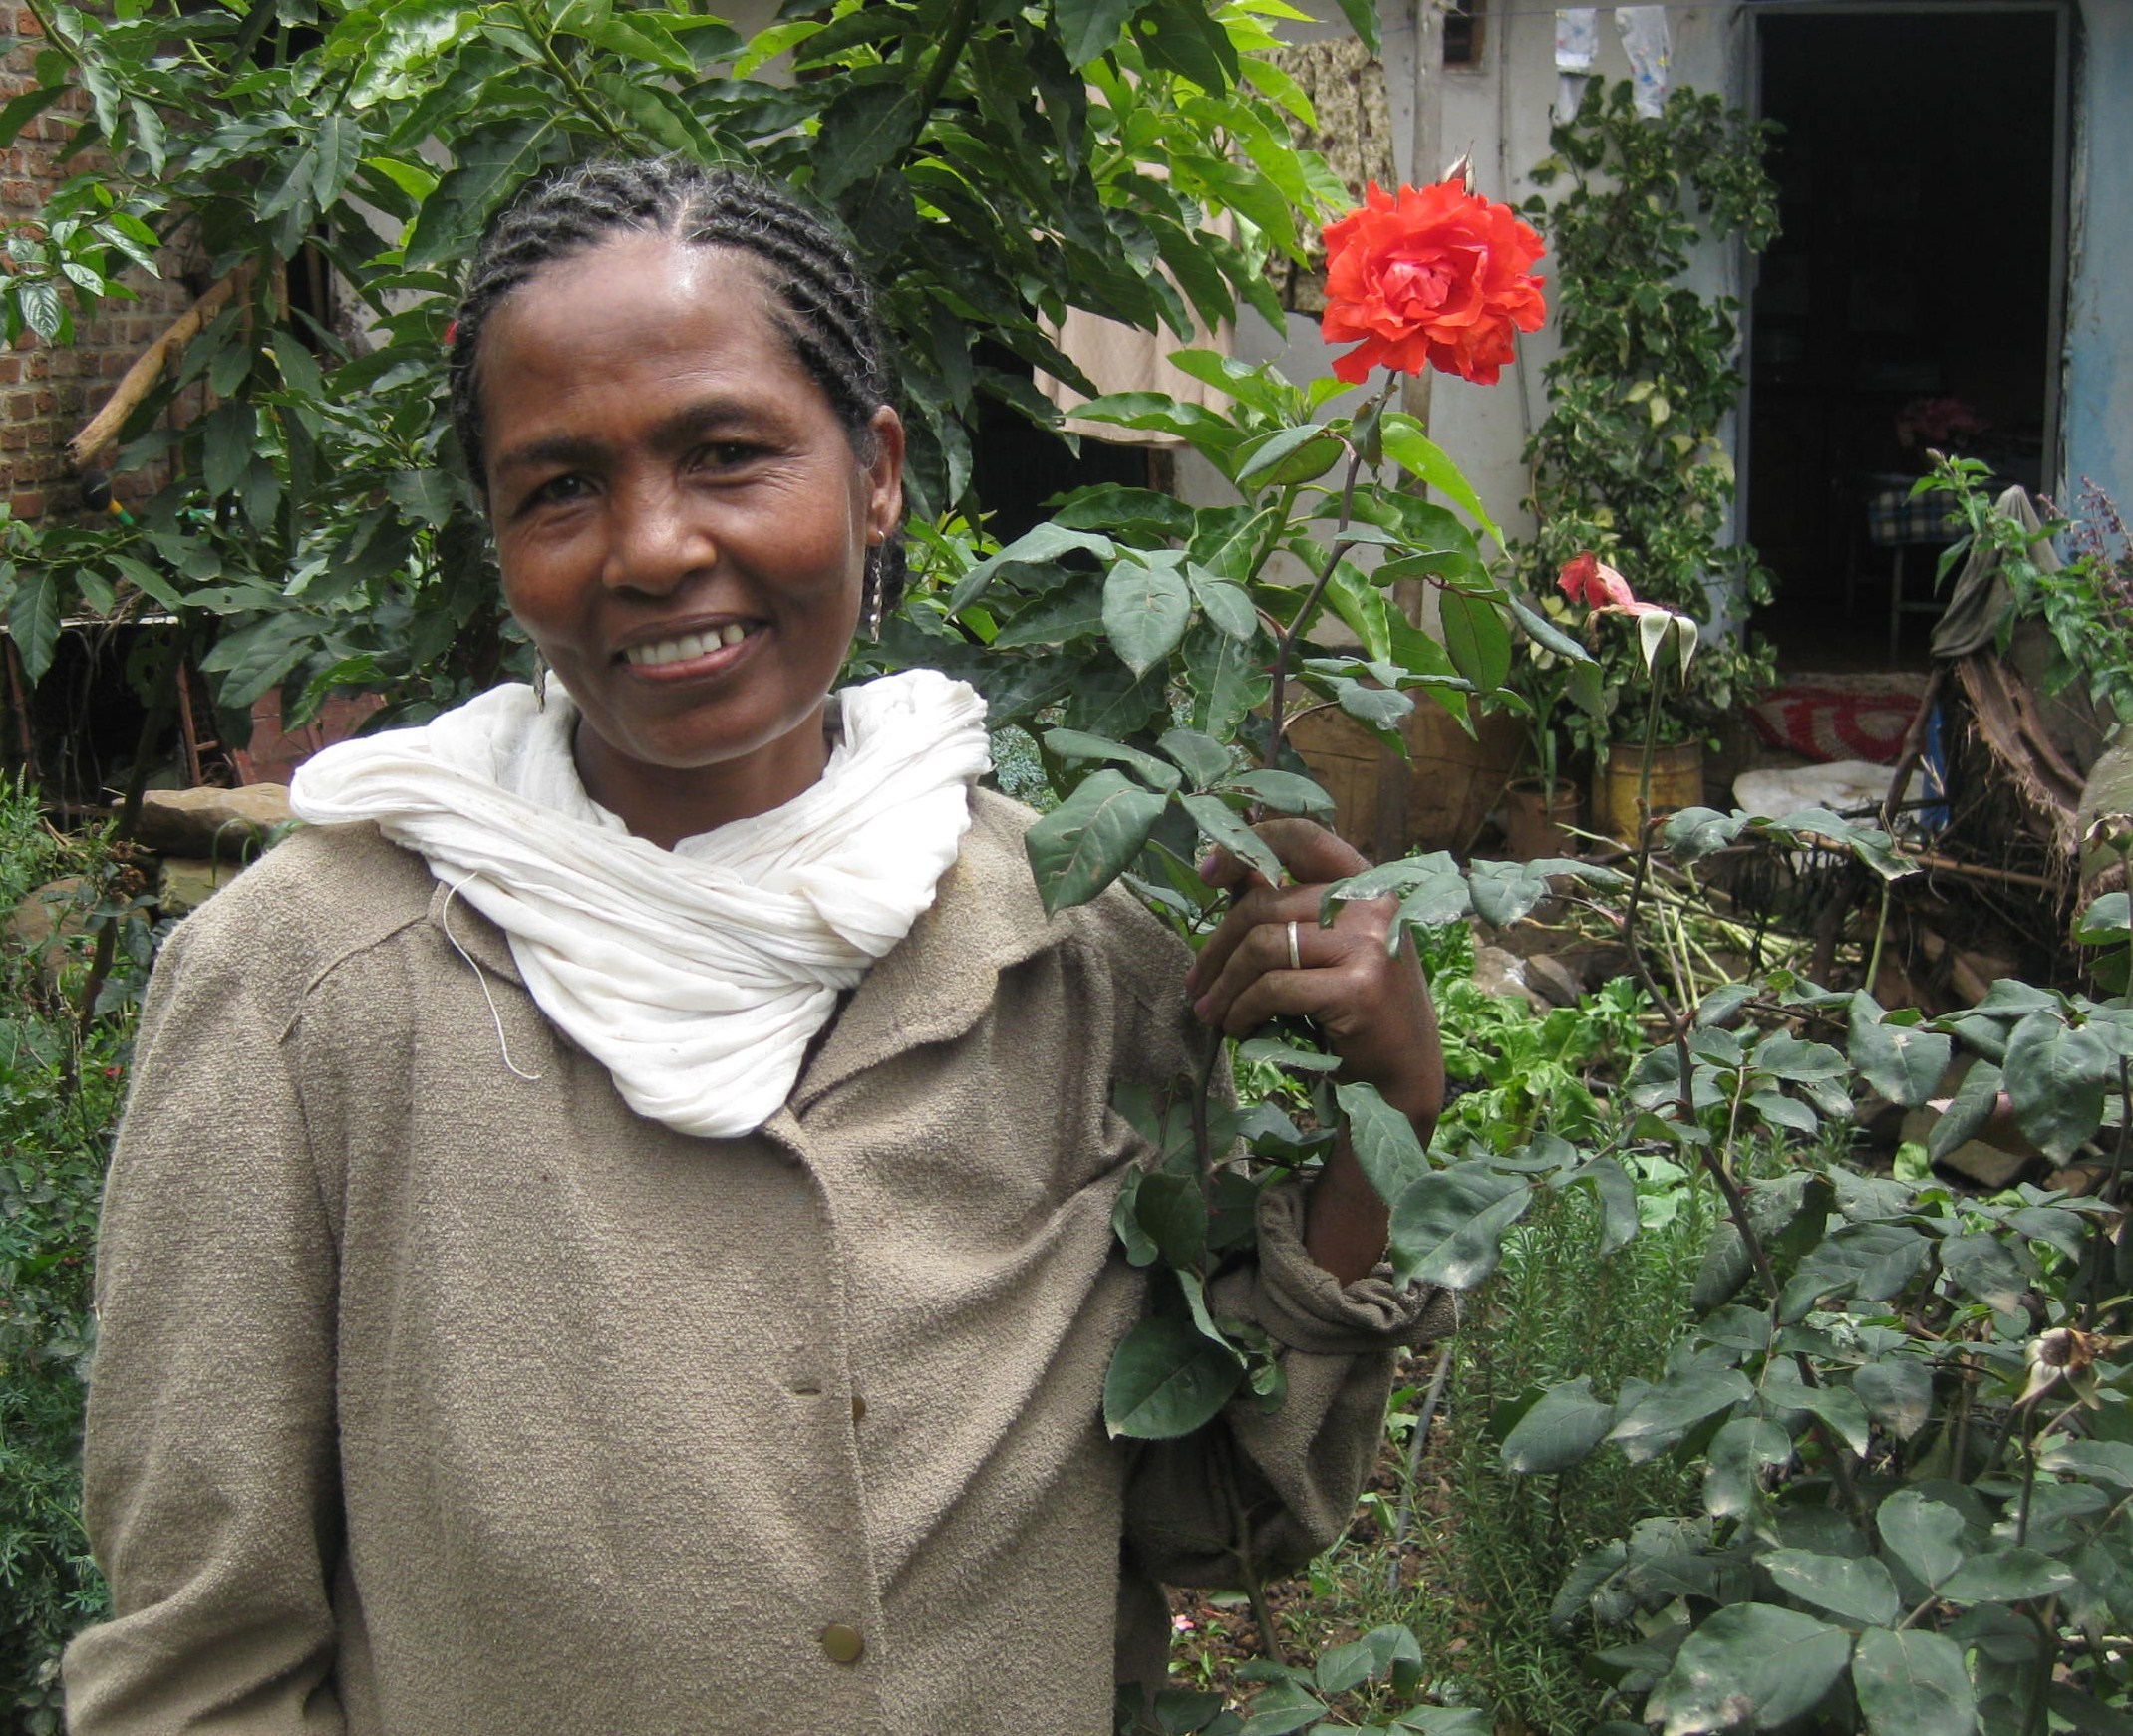 Addis Ababa, Ethiopia: Urban Gardens for Health, Solidarity, and Sustainability